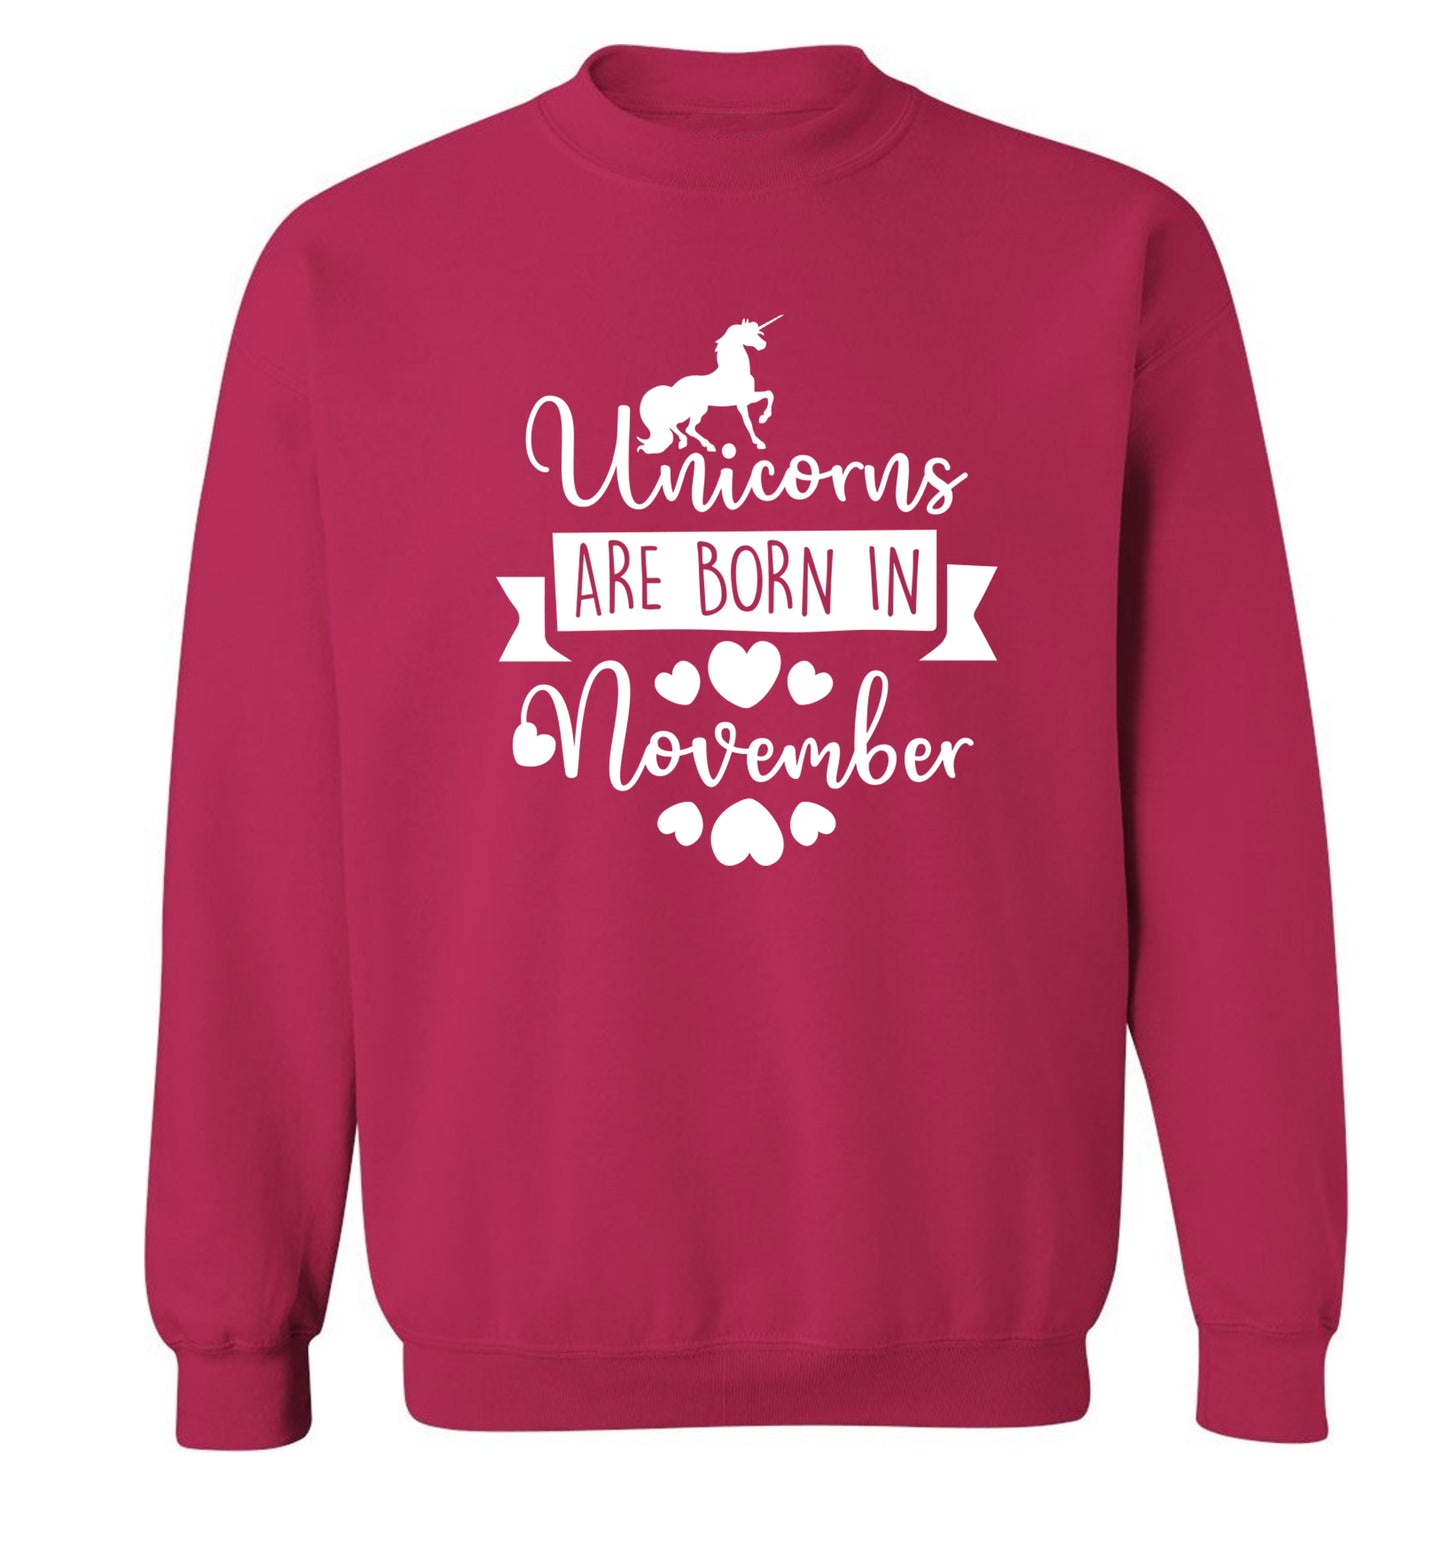 Unicorns are born in November Adult's unisex pink Sweater 2XL